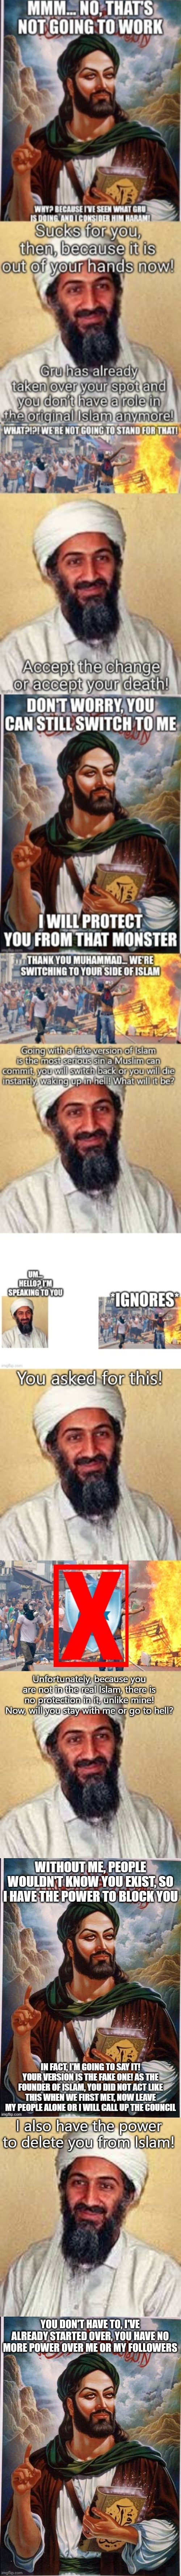 Muhammad has effectively deleted "Allah" from Islam | YOU DON'T HAVE TO, I'VE ALREADY STARTED OVER, YOU HAVE NO MORE POWER OVER ME OR MY FOLLOWERS | image tagged in mohammed | made w/ Imgflip meme maker